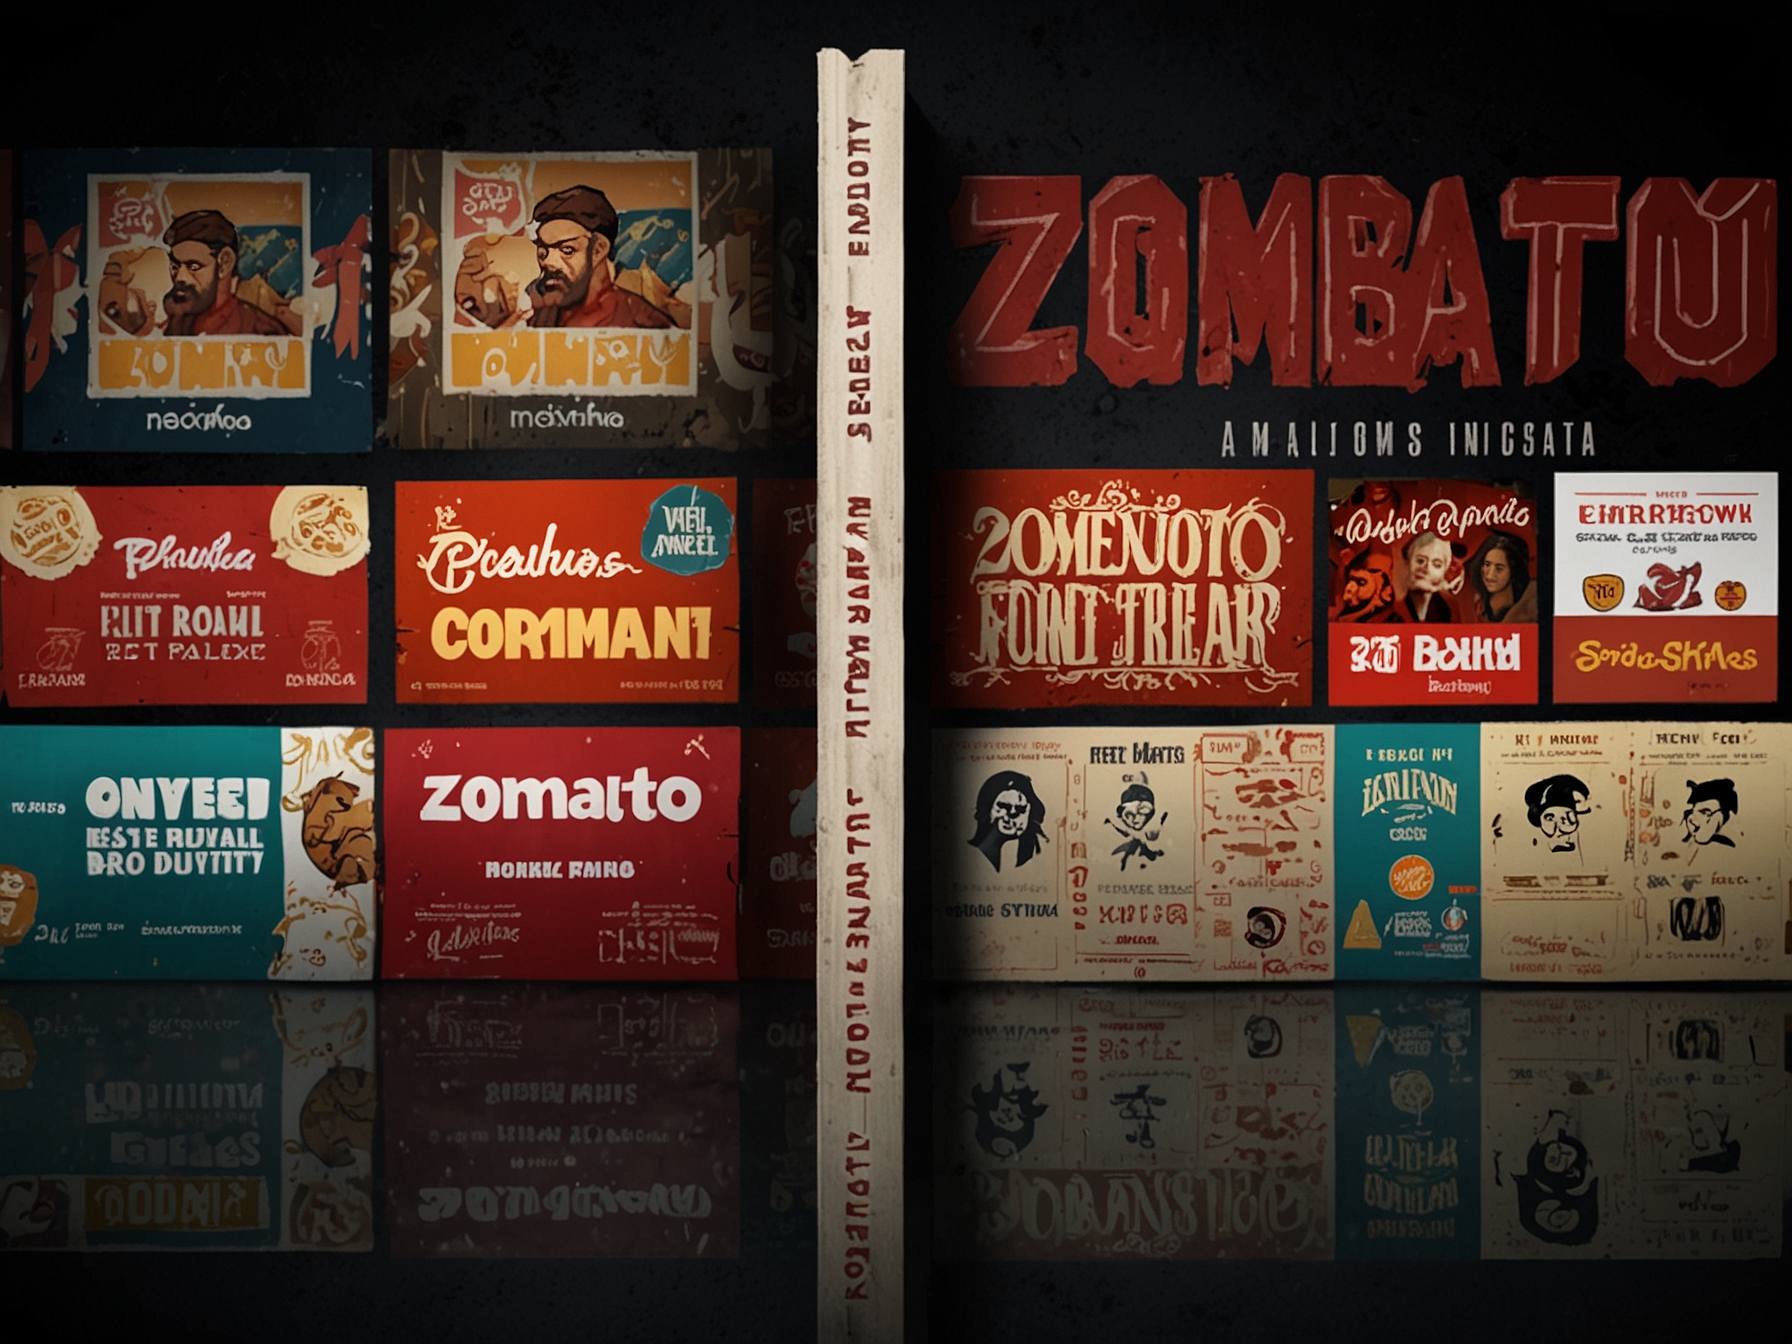 A split-screen graphic of the Zomato and BookMyShow logos, with movie icons and tickets in between, depicting the competitive tension between the two giants in the Indian entertainment market.